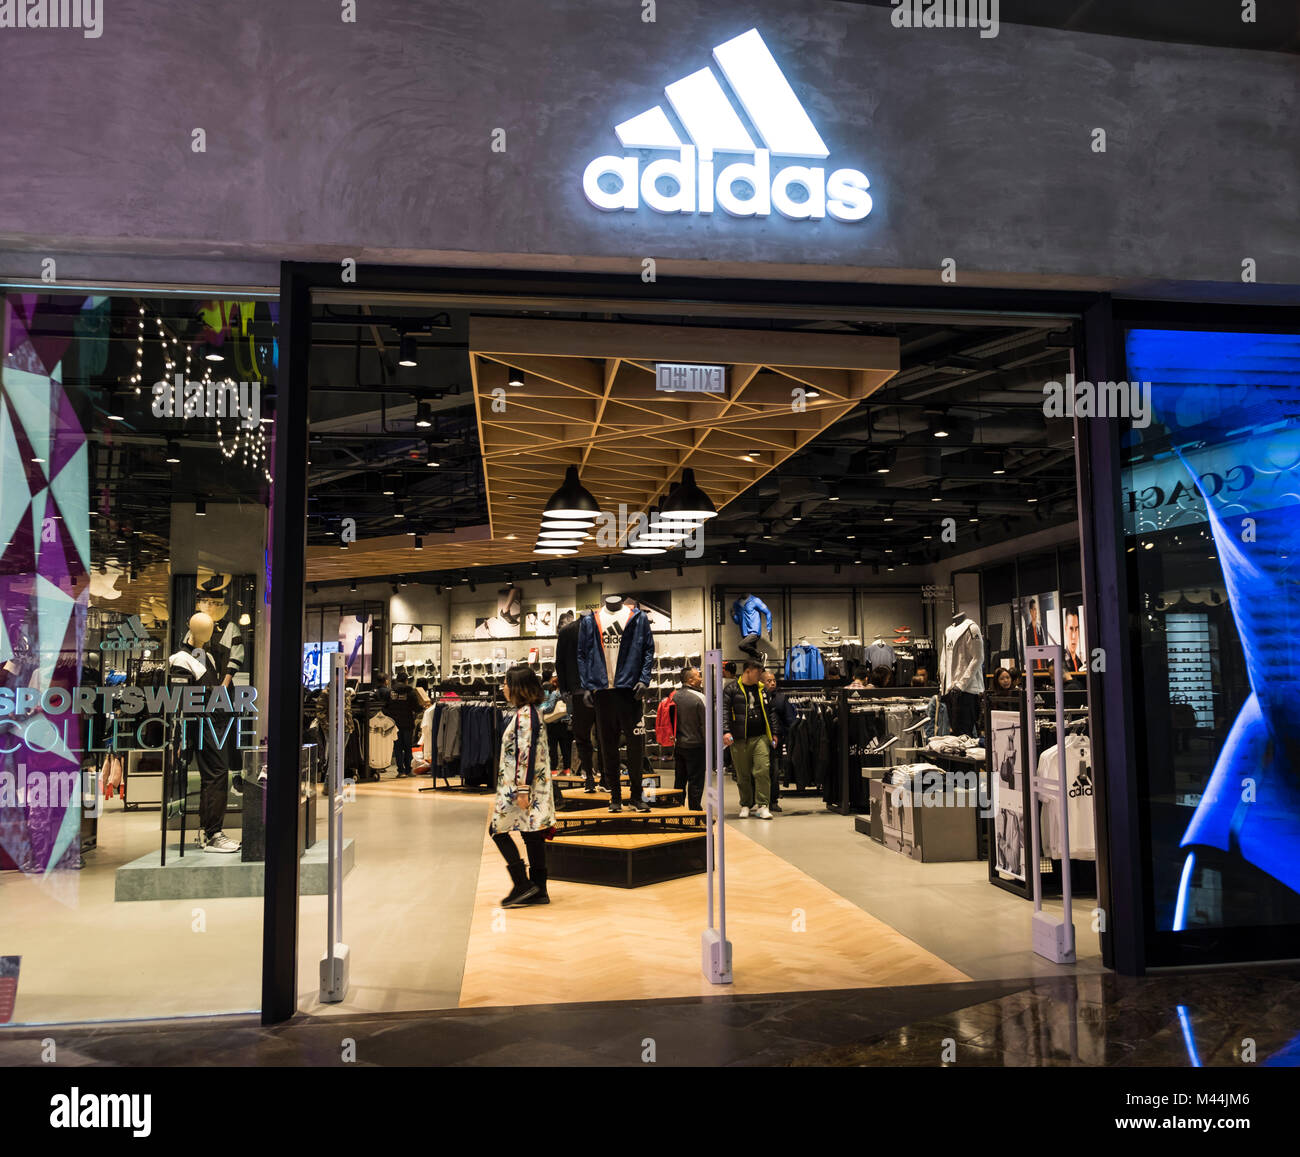 adidas outlet stock